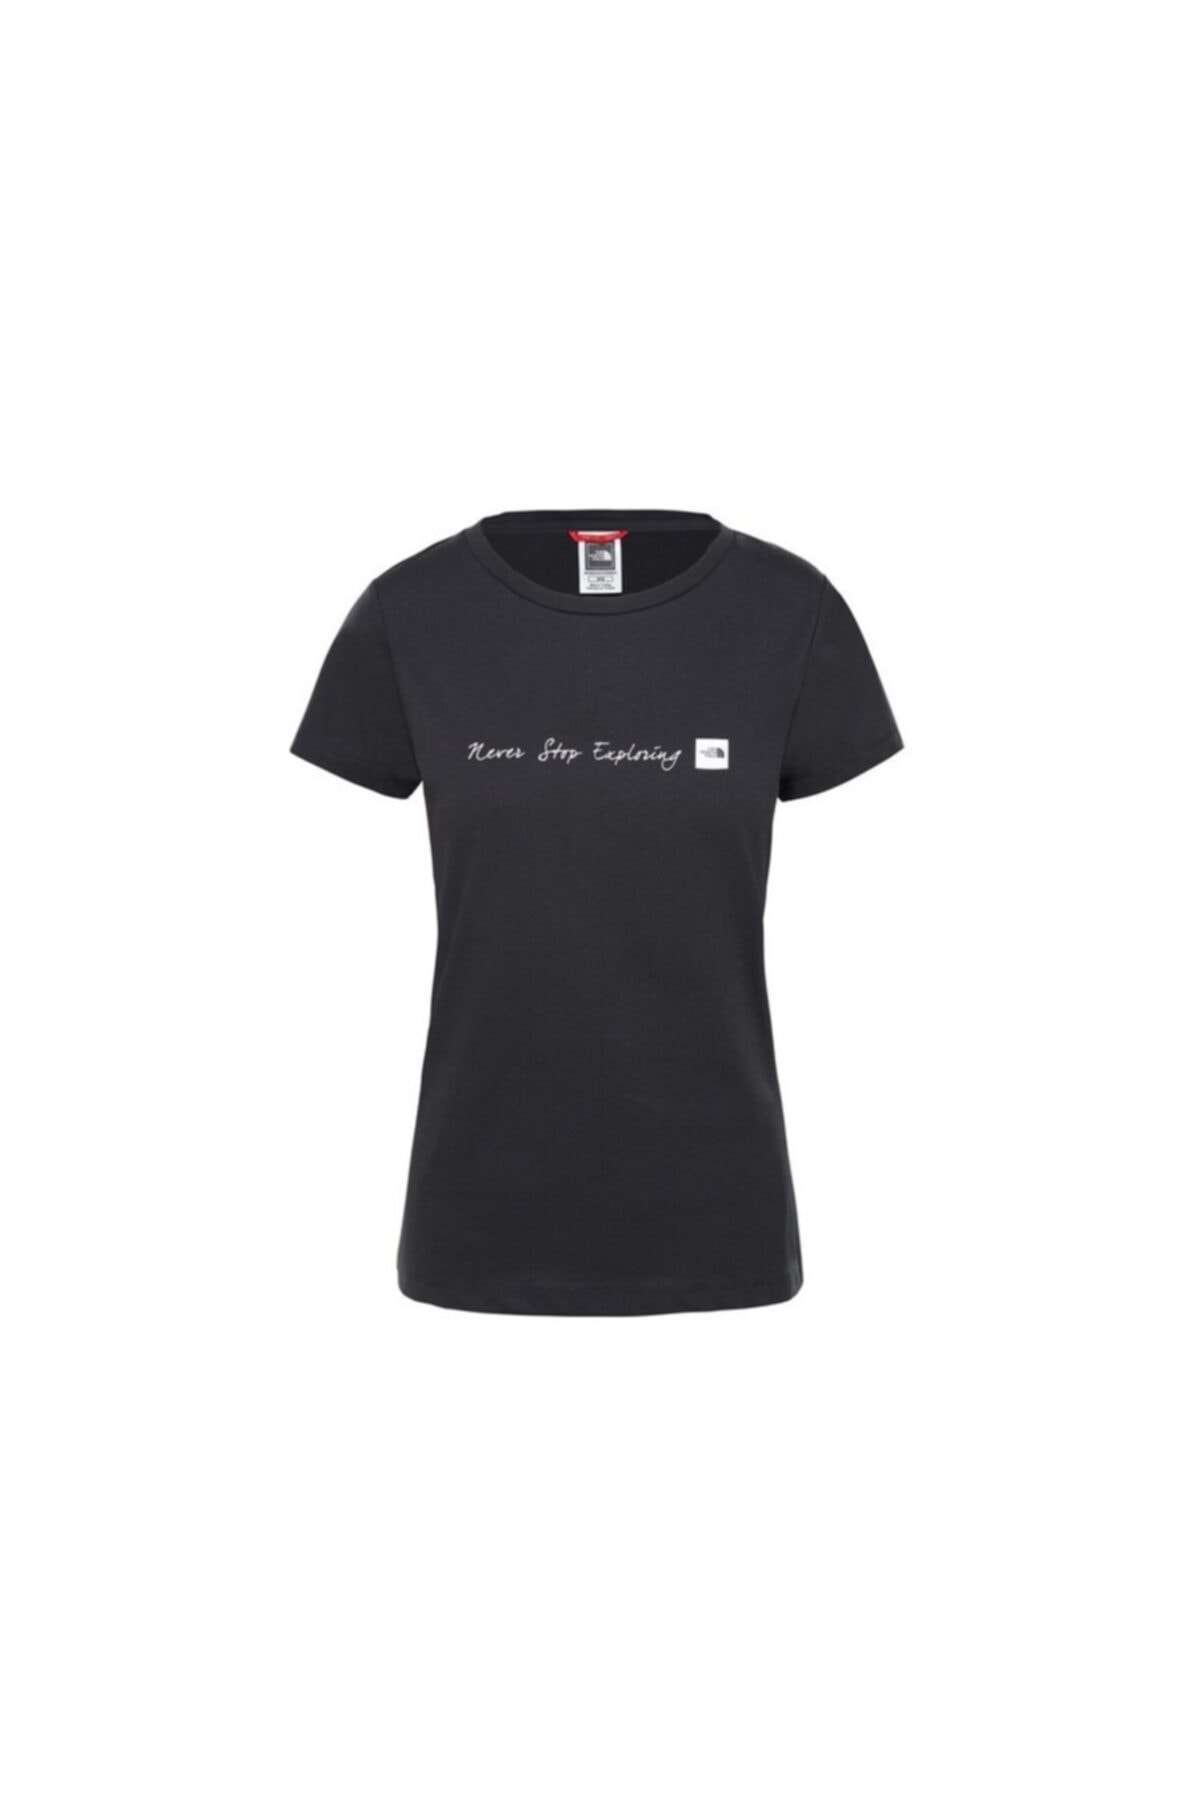 THE NORTH FACE W S/s Neverstopexploring Tee-eu